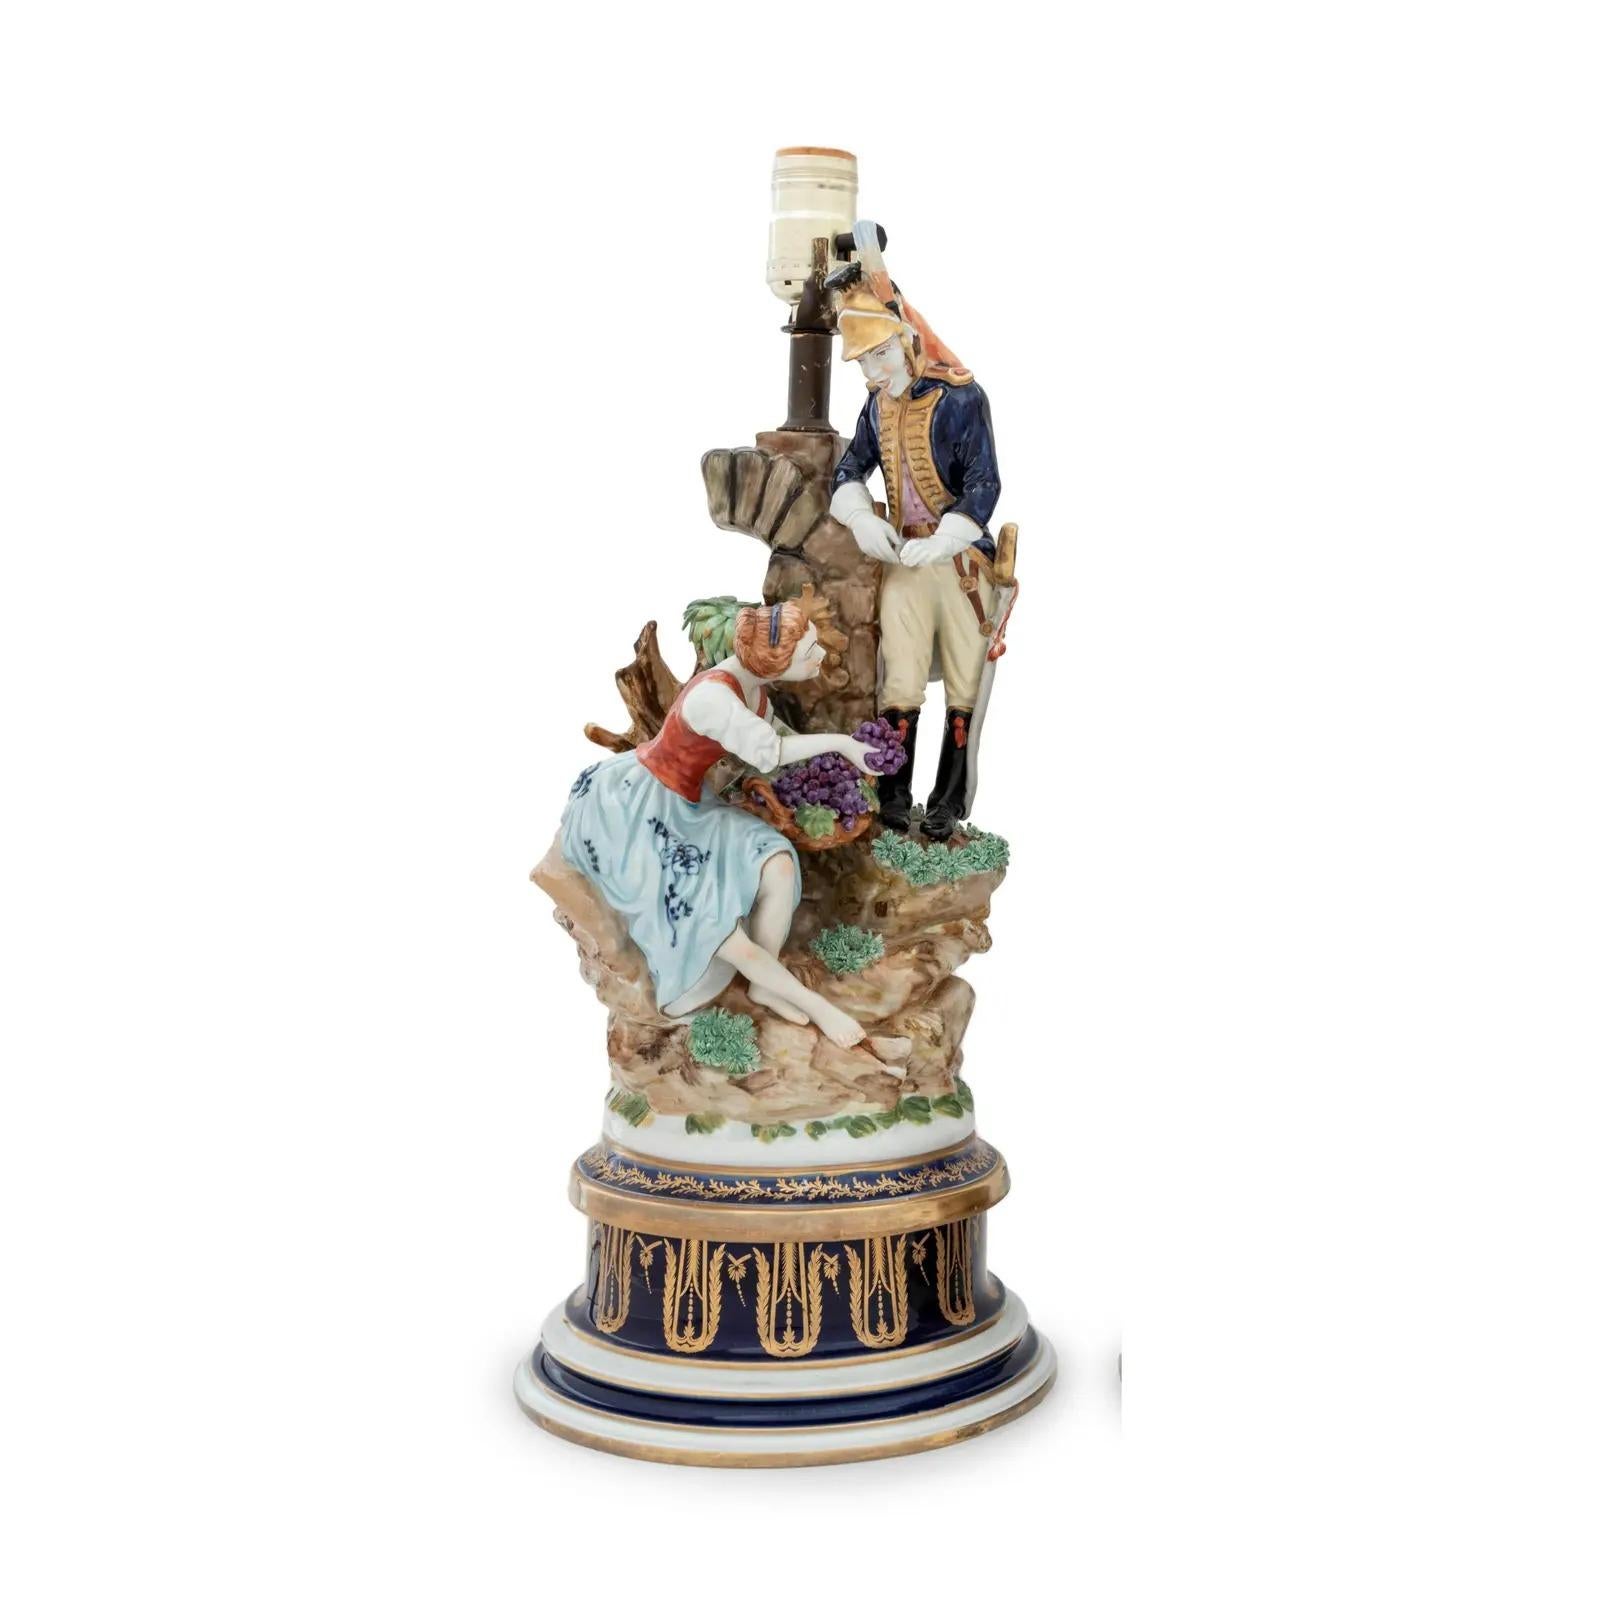 Antique Capodimonte Porcelain figural group designer lamp

Additional information:
Materials: Porcelain
Color: Sky Blue
Brand: Capodimonte
Period: early 19th century
Styles: Figurative
Lamp Shade: Included
Item Type: Vintage, Antique or